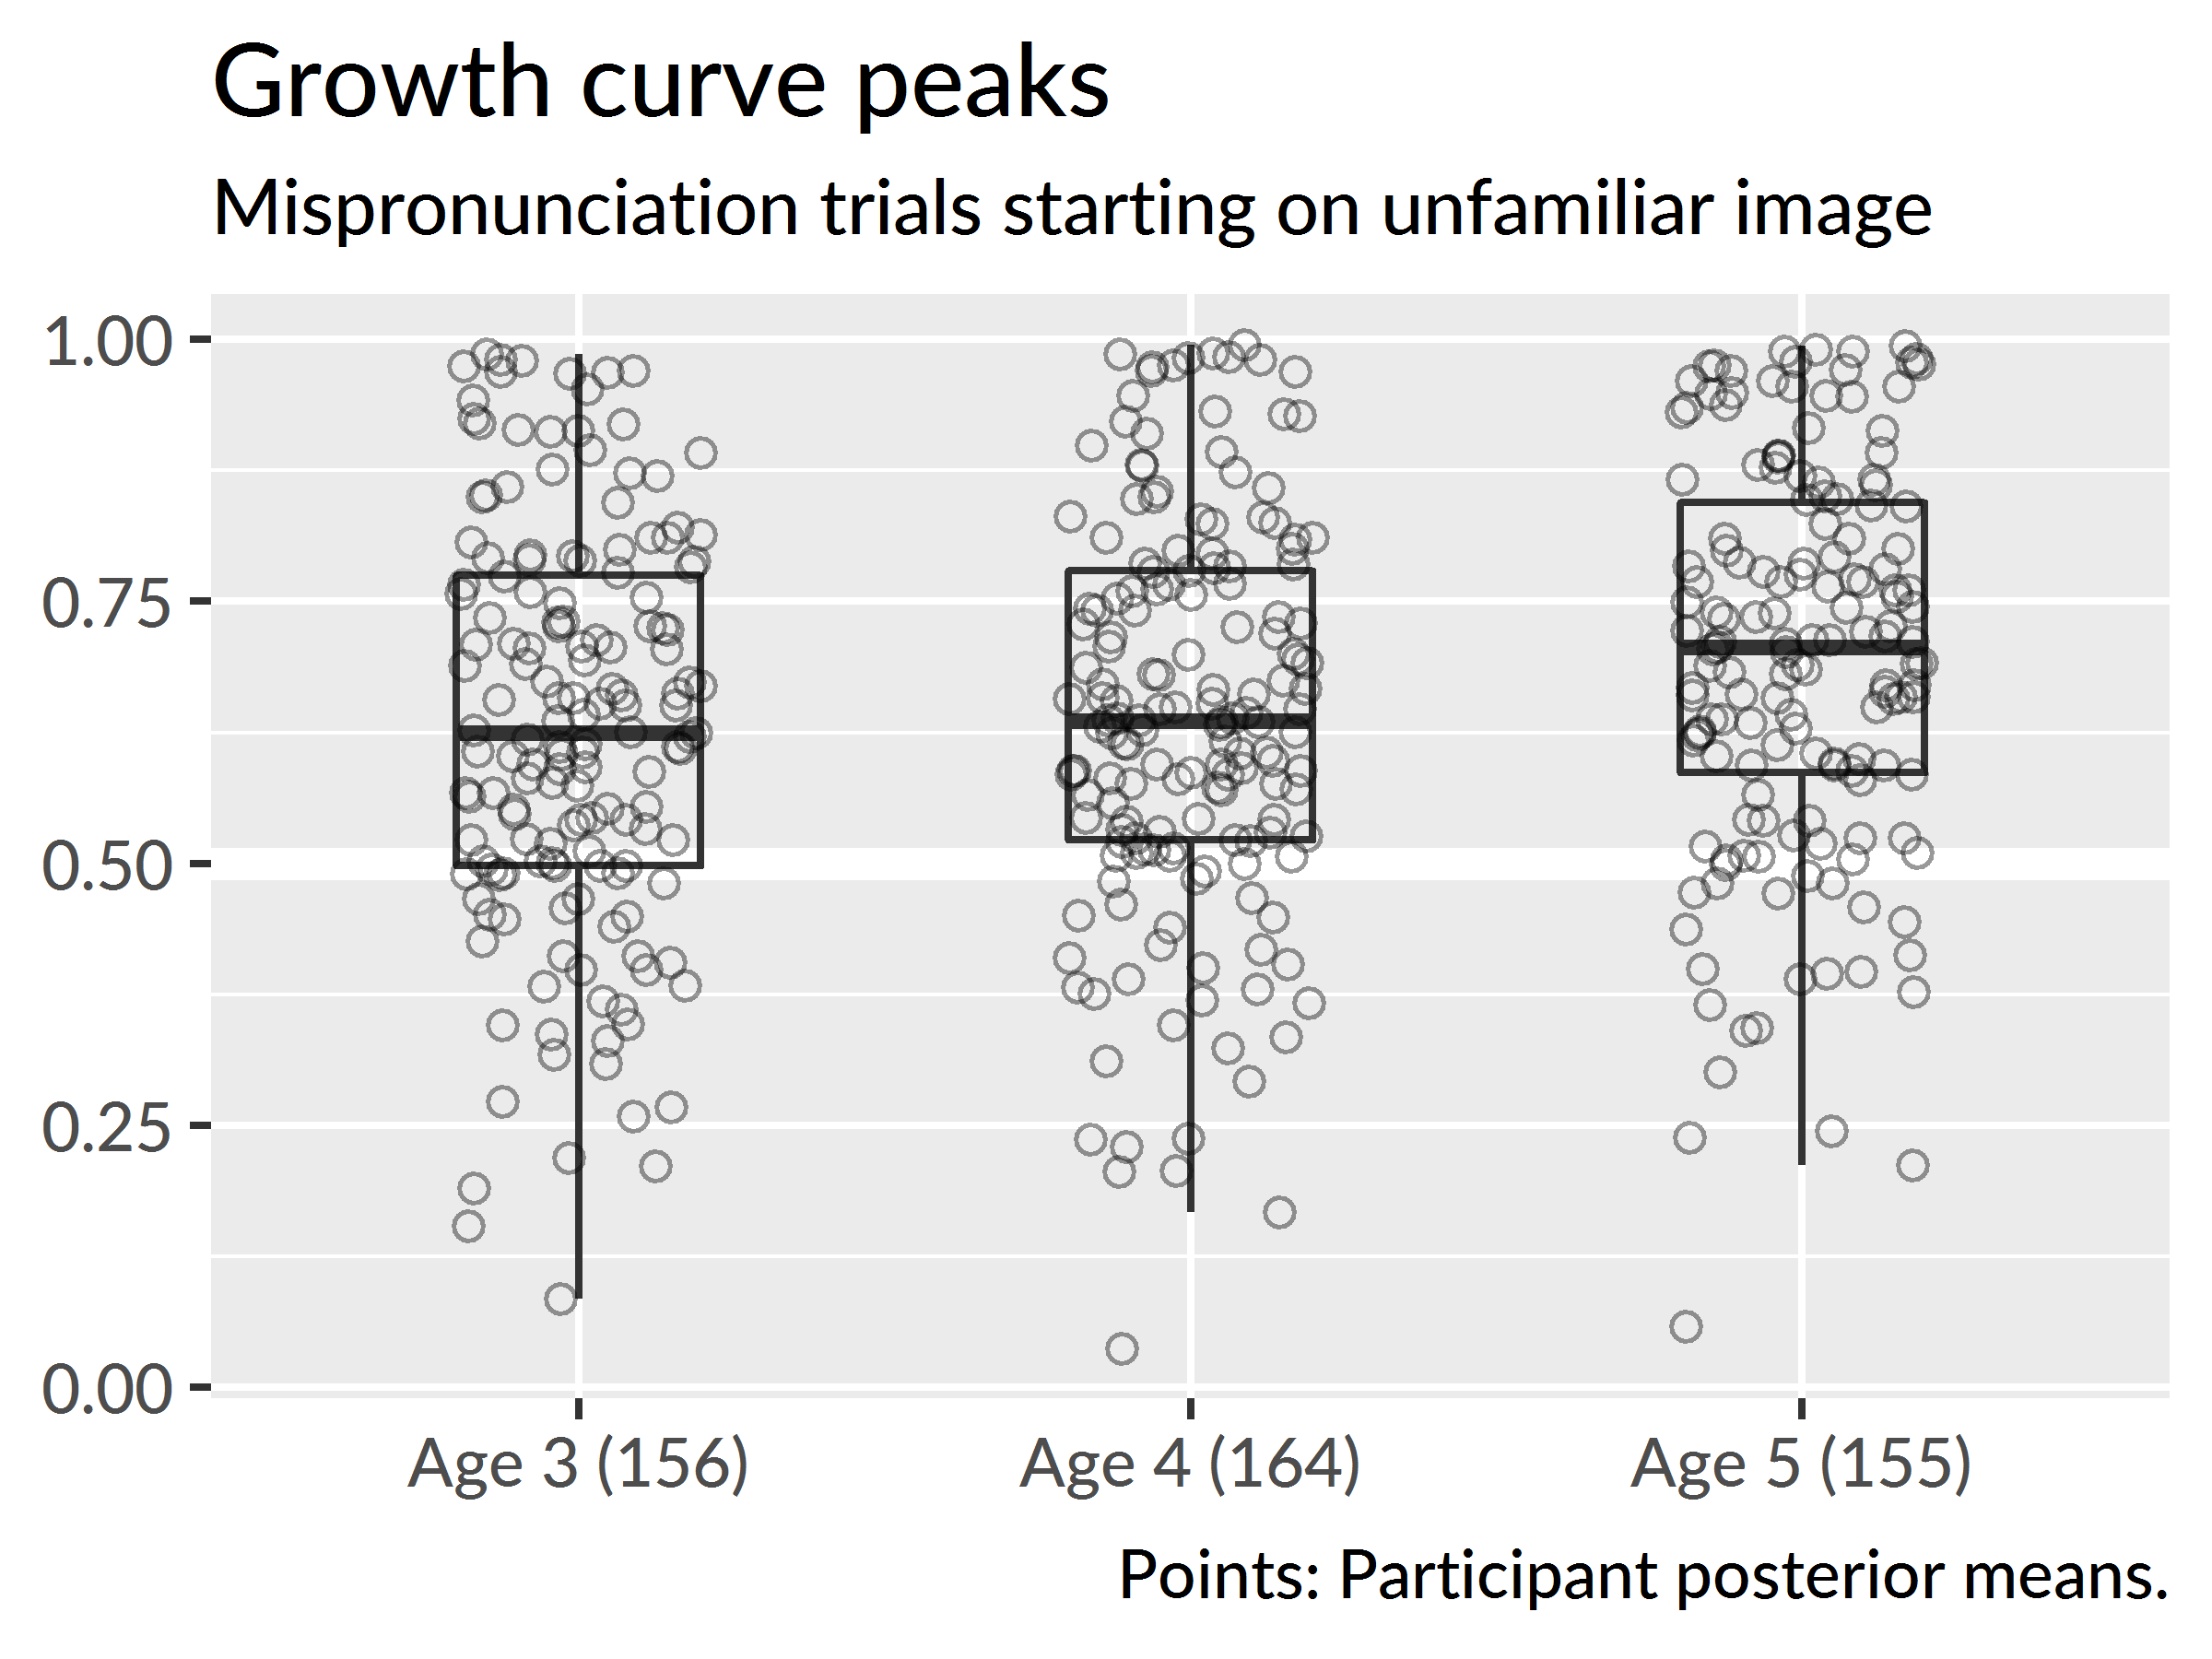 Growth curve peaks by age for mispronunciation trials starting on the unfamiliar image.